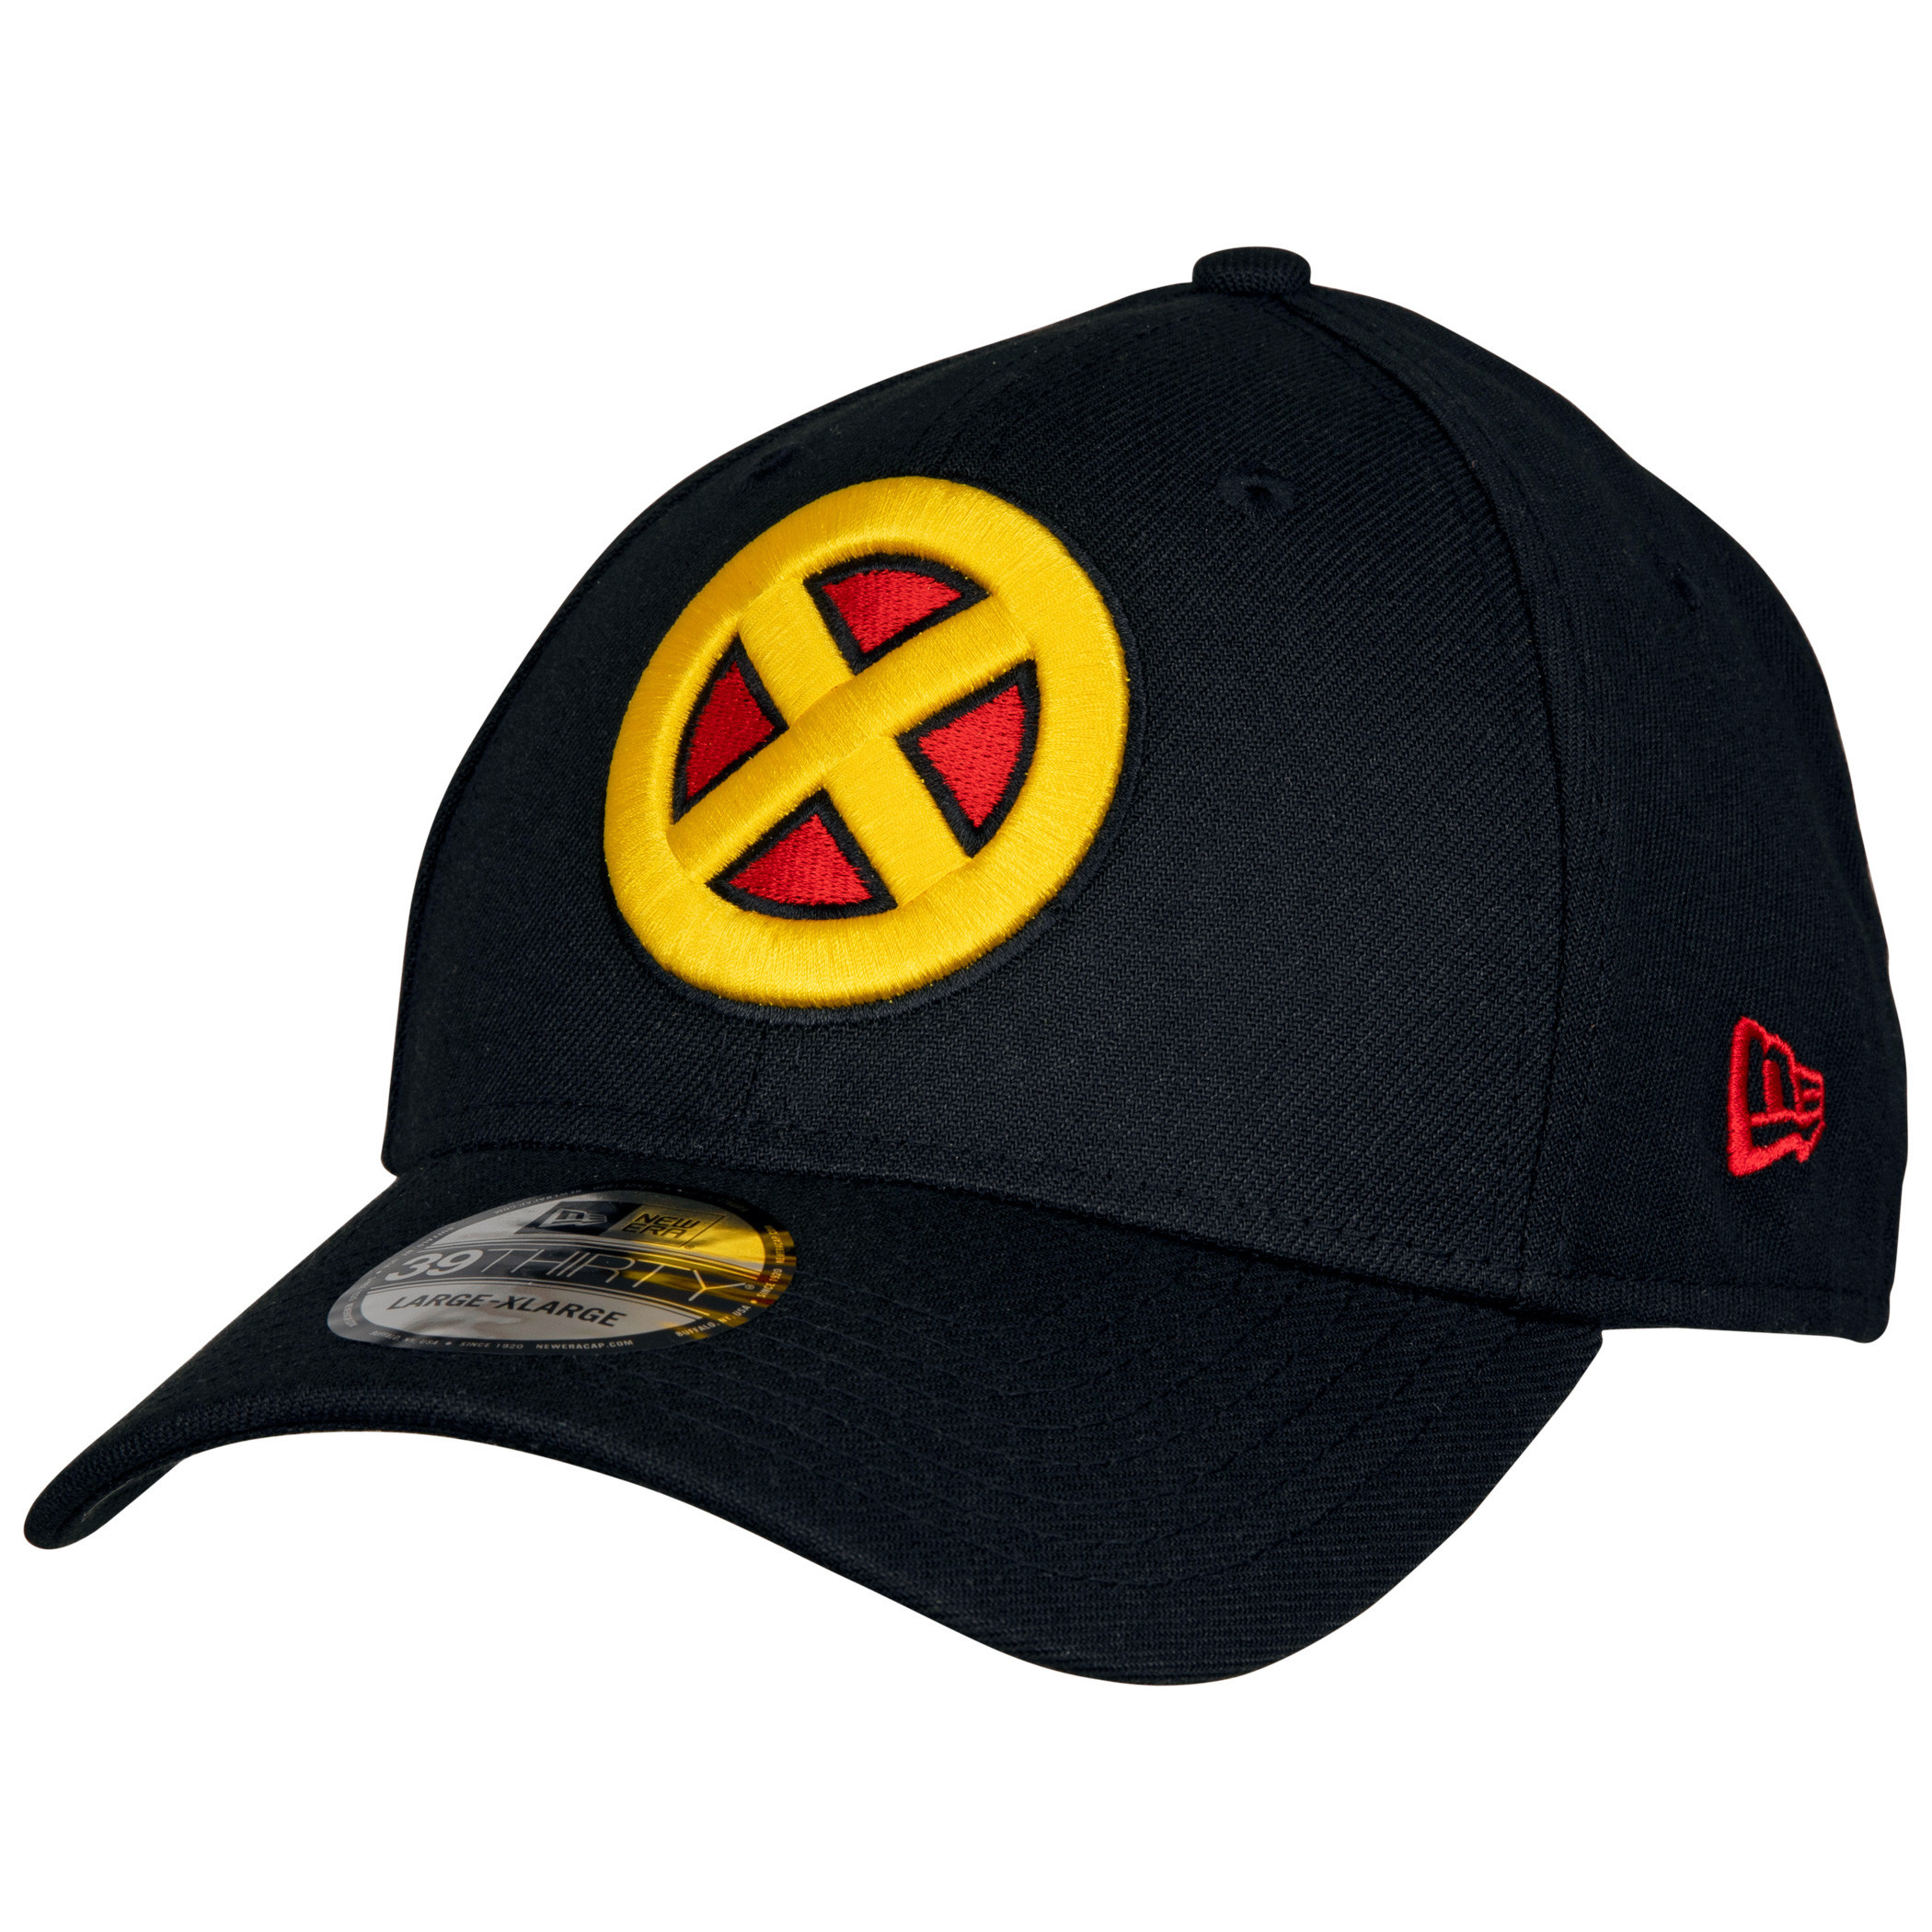 X-Men Ultimate 3930 Flexfit Collection by New Era